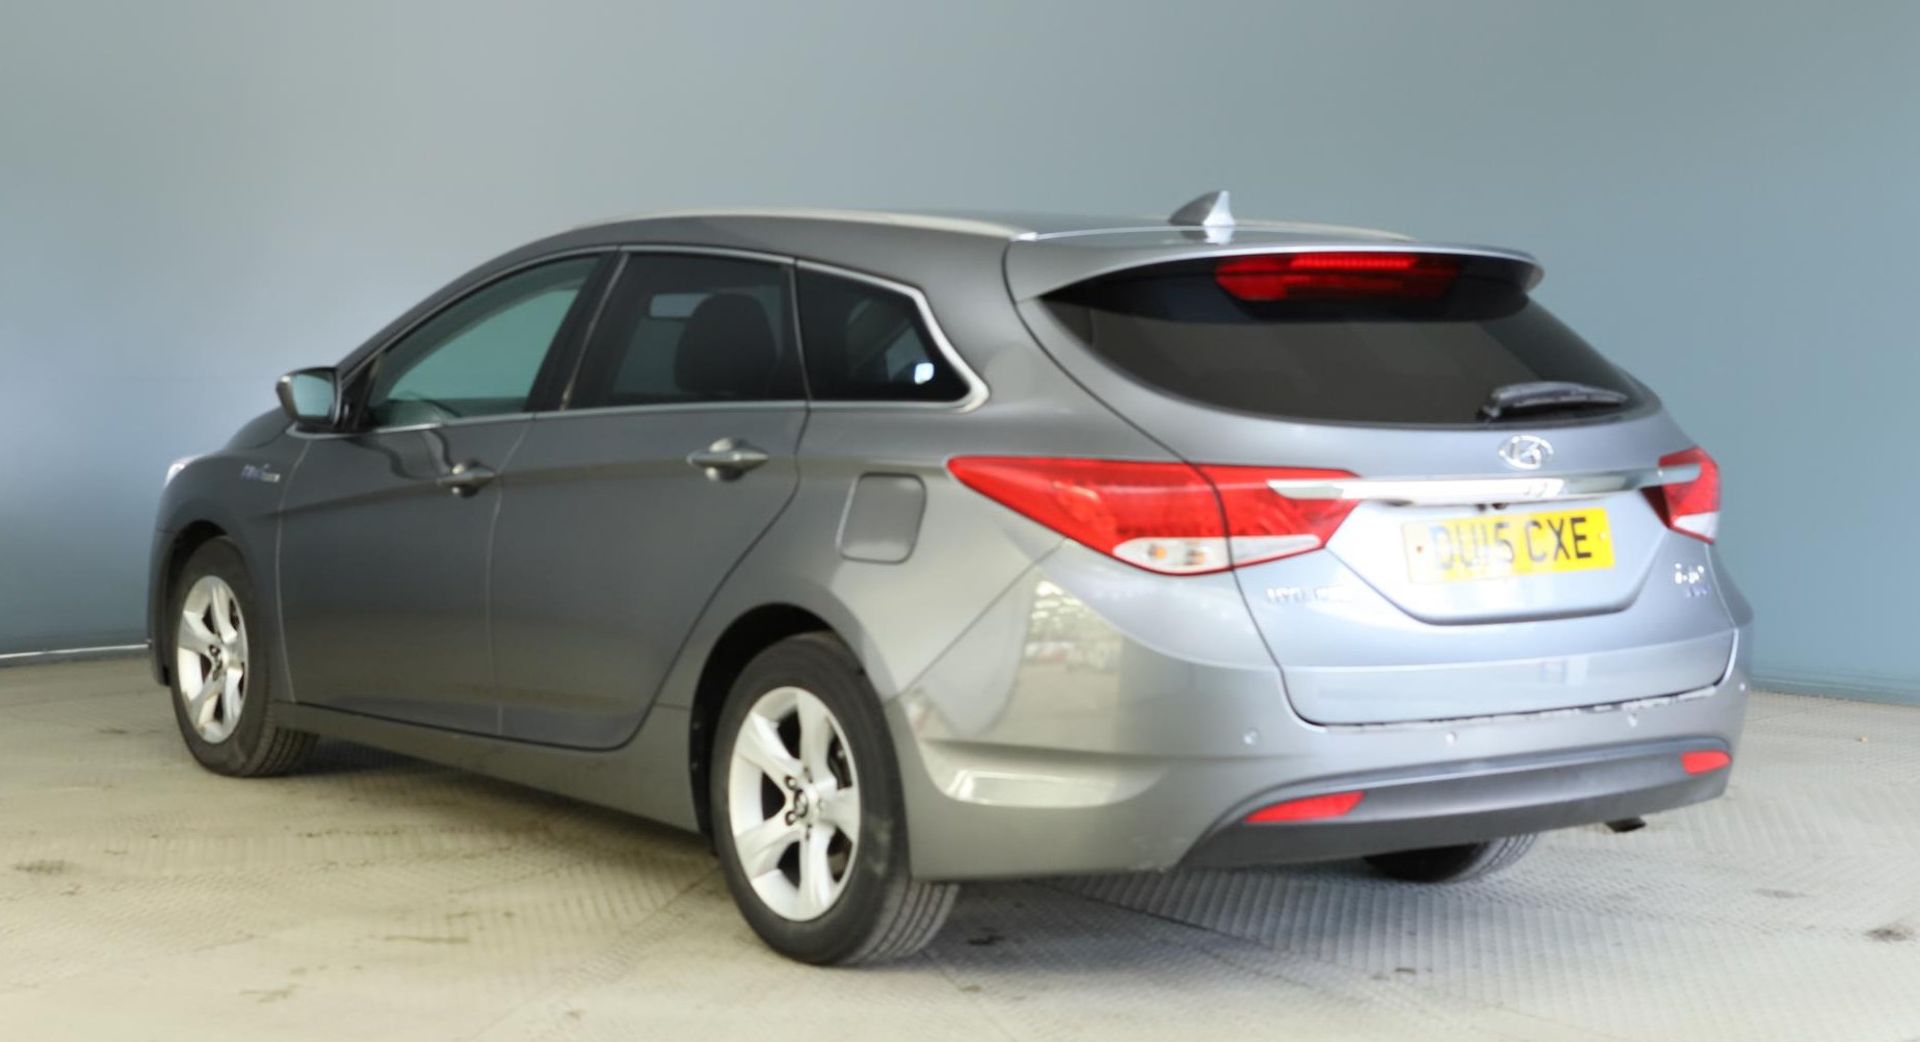 2015 Hyundai I40 1.7 Crdi Blue Drive Style 5 Door Estate - CL505 - NO VAT ON THE HAMMER - Location: - Image 3 of 12